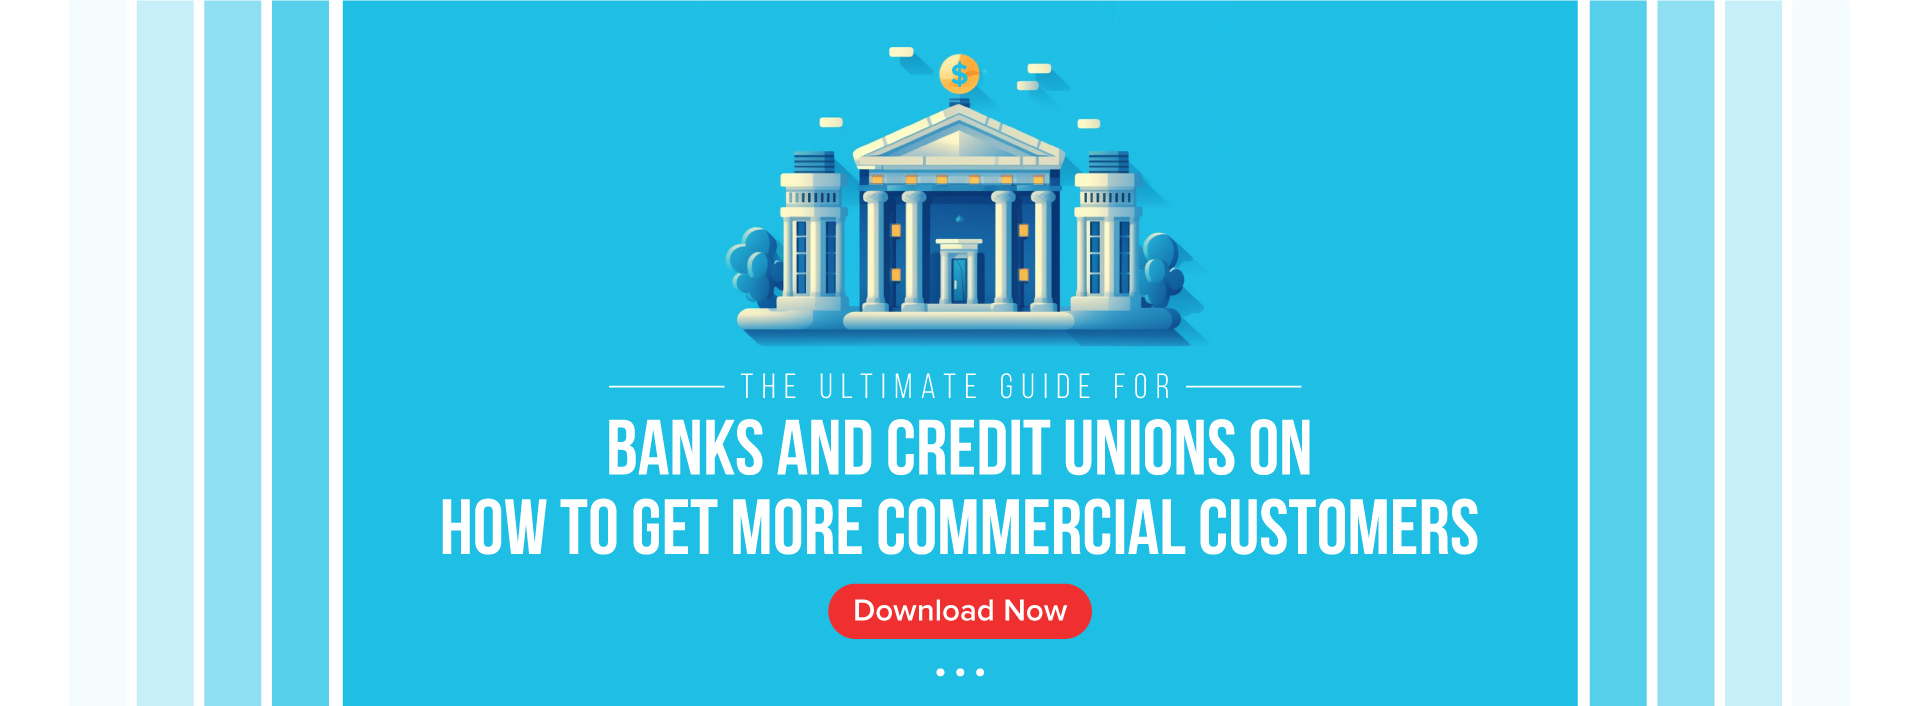 The-Ultimate-Guide-for-Banks-and-Credit-Unions-on-How-to-Get-More-Commercial-Customers-Banner-1